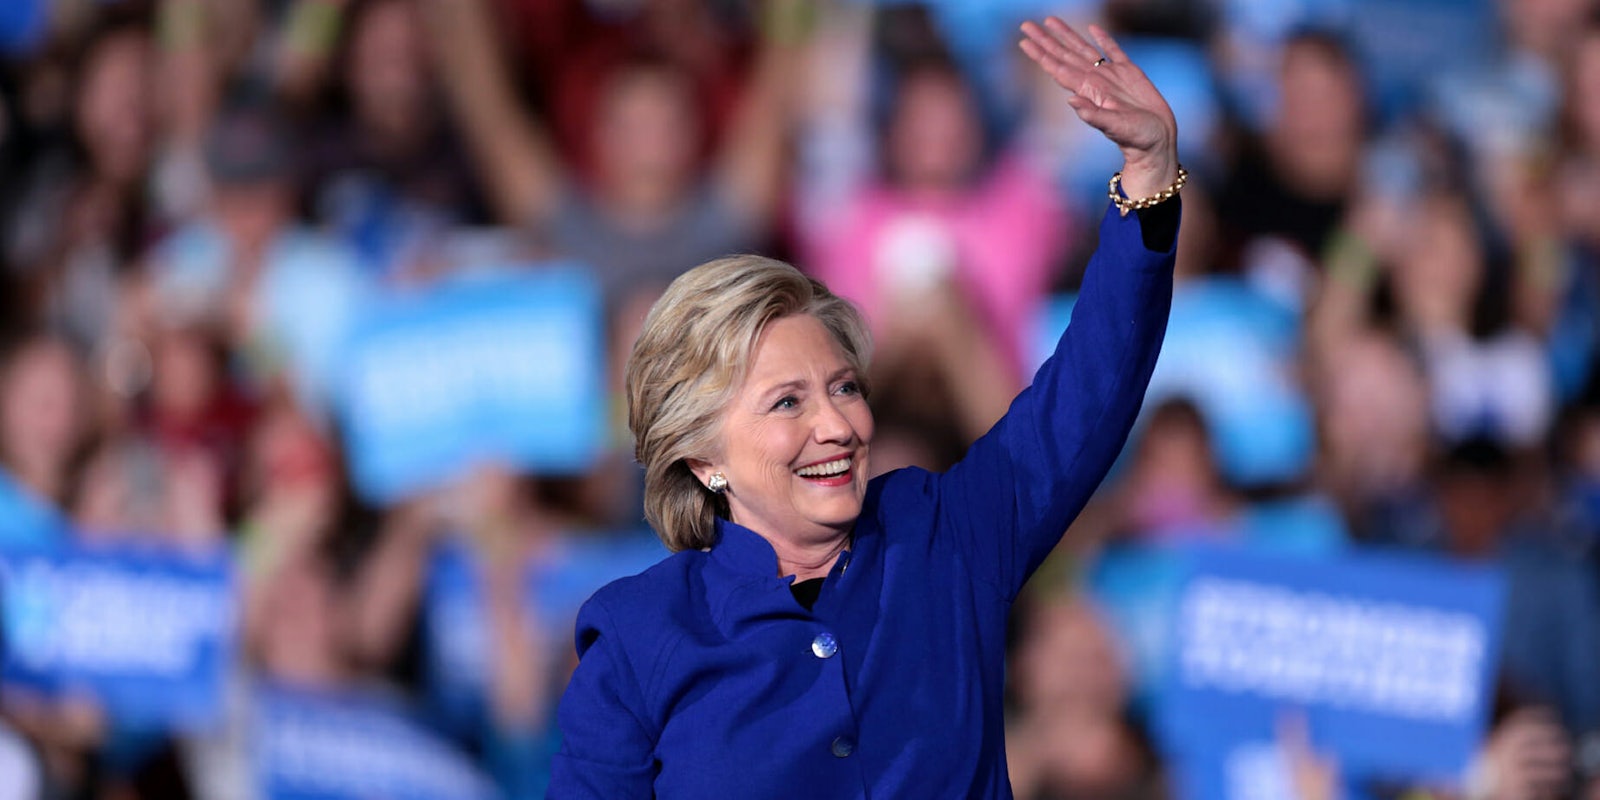 Hillary Clinton reportedly will help specific Democratic candidates ahead of the 2018 midterm elections, but does not want to be a Republican target.